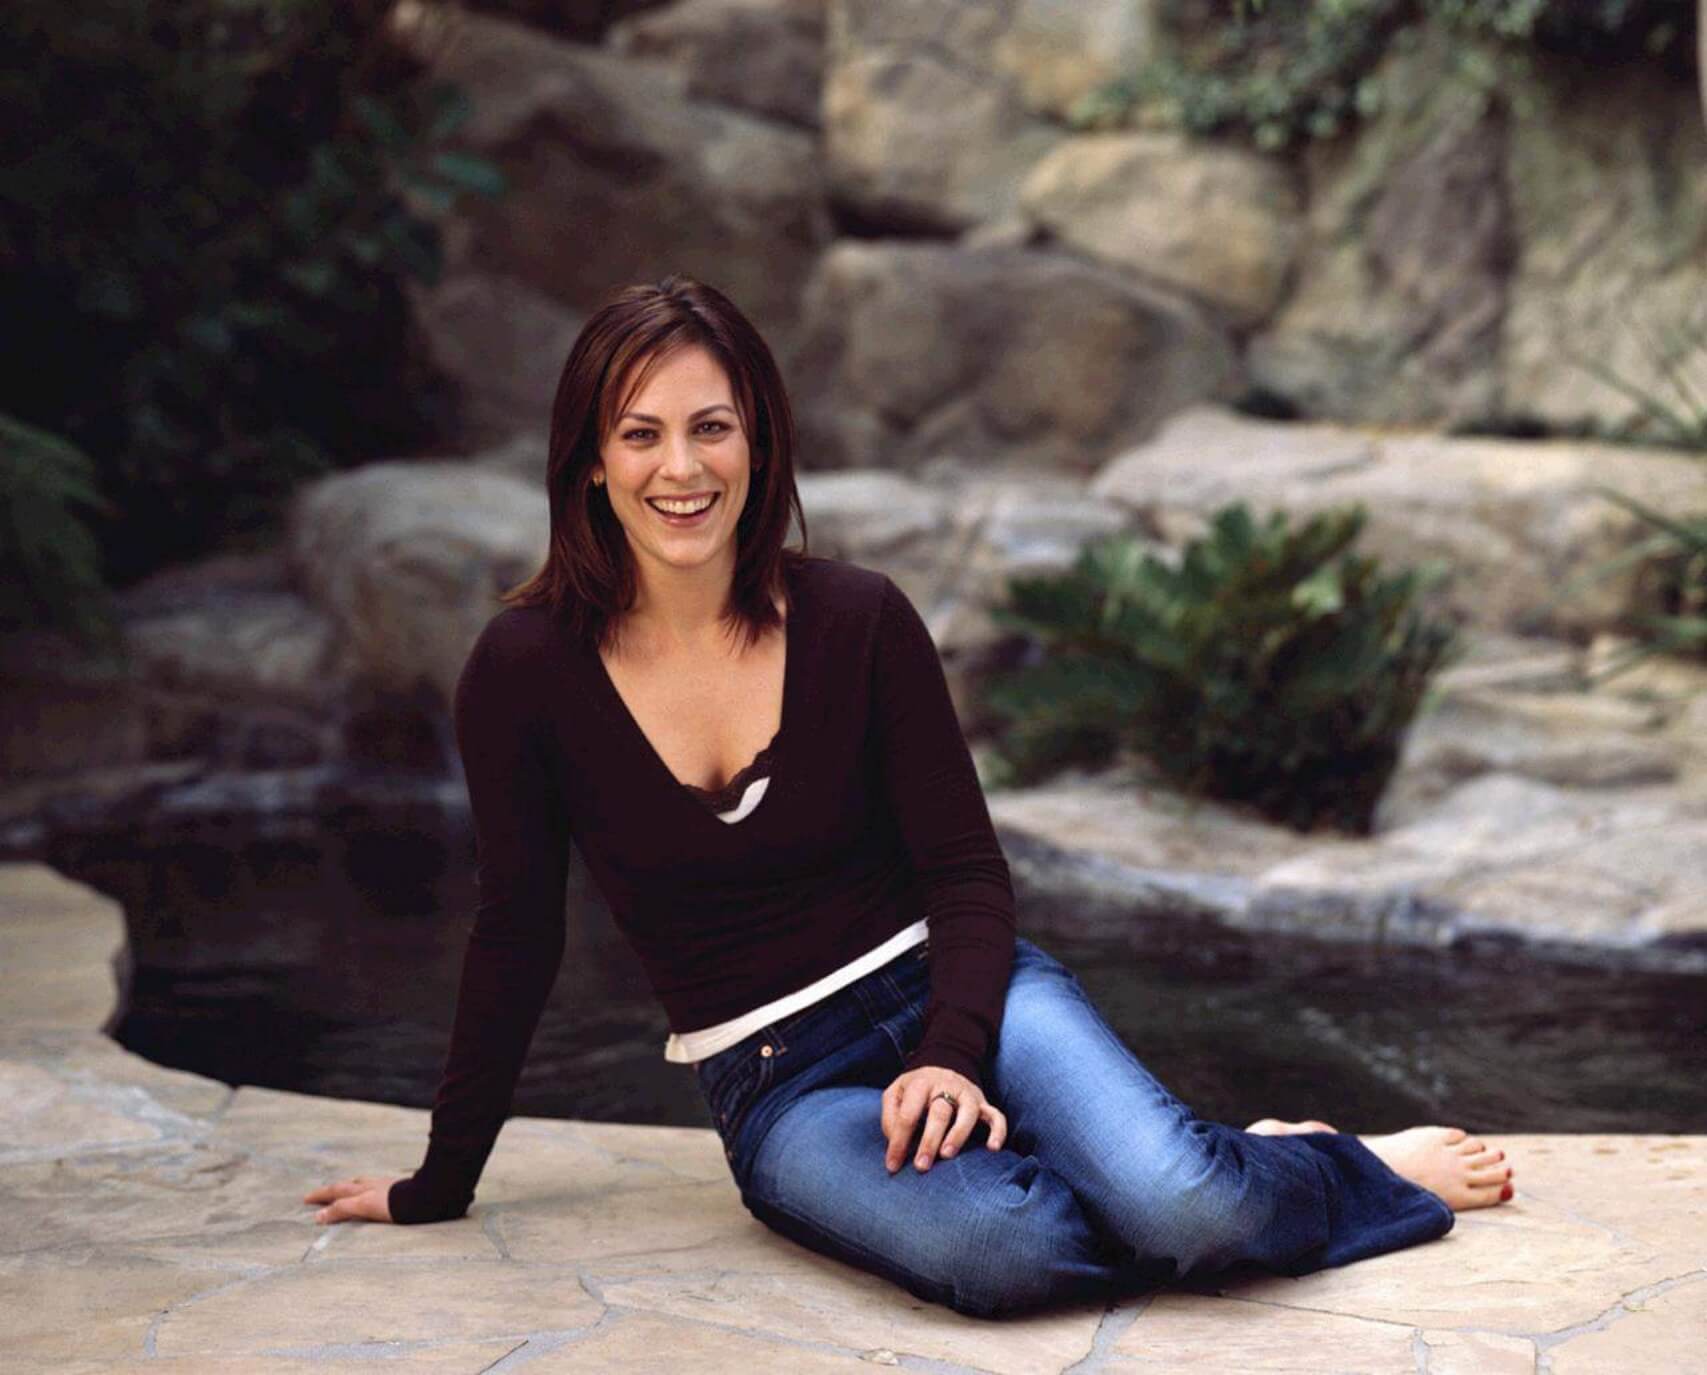 49 Hot Pictures Of Annabeth Gish Show Off Amazing Sexy Ass And Hour Glass Sexy Body | Best Of Comic Books